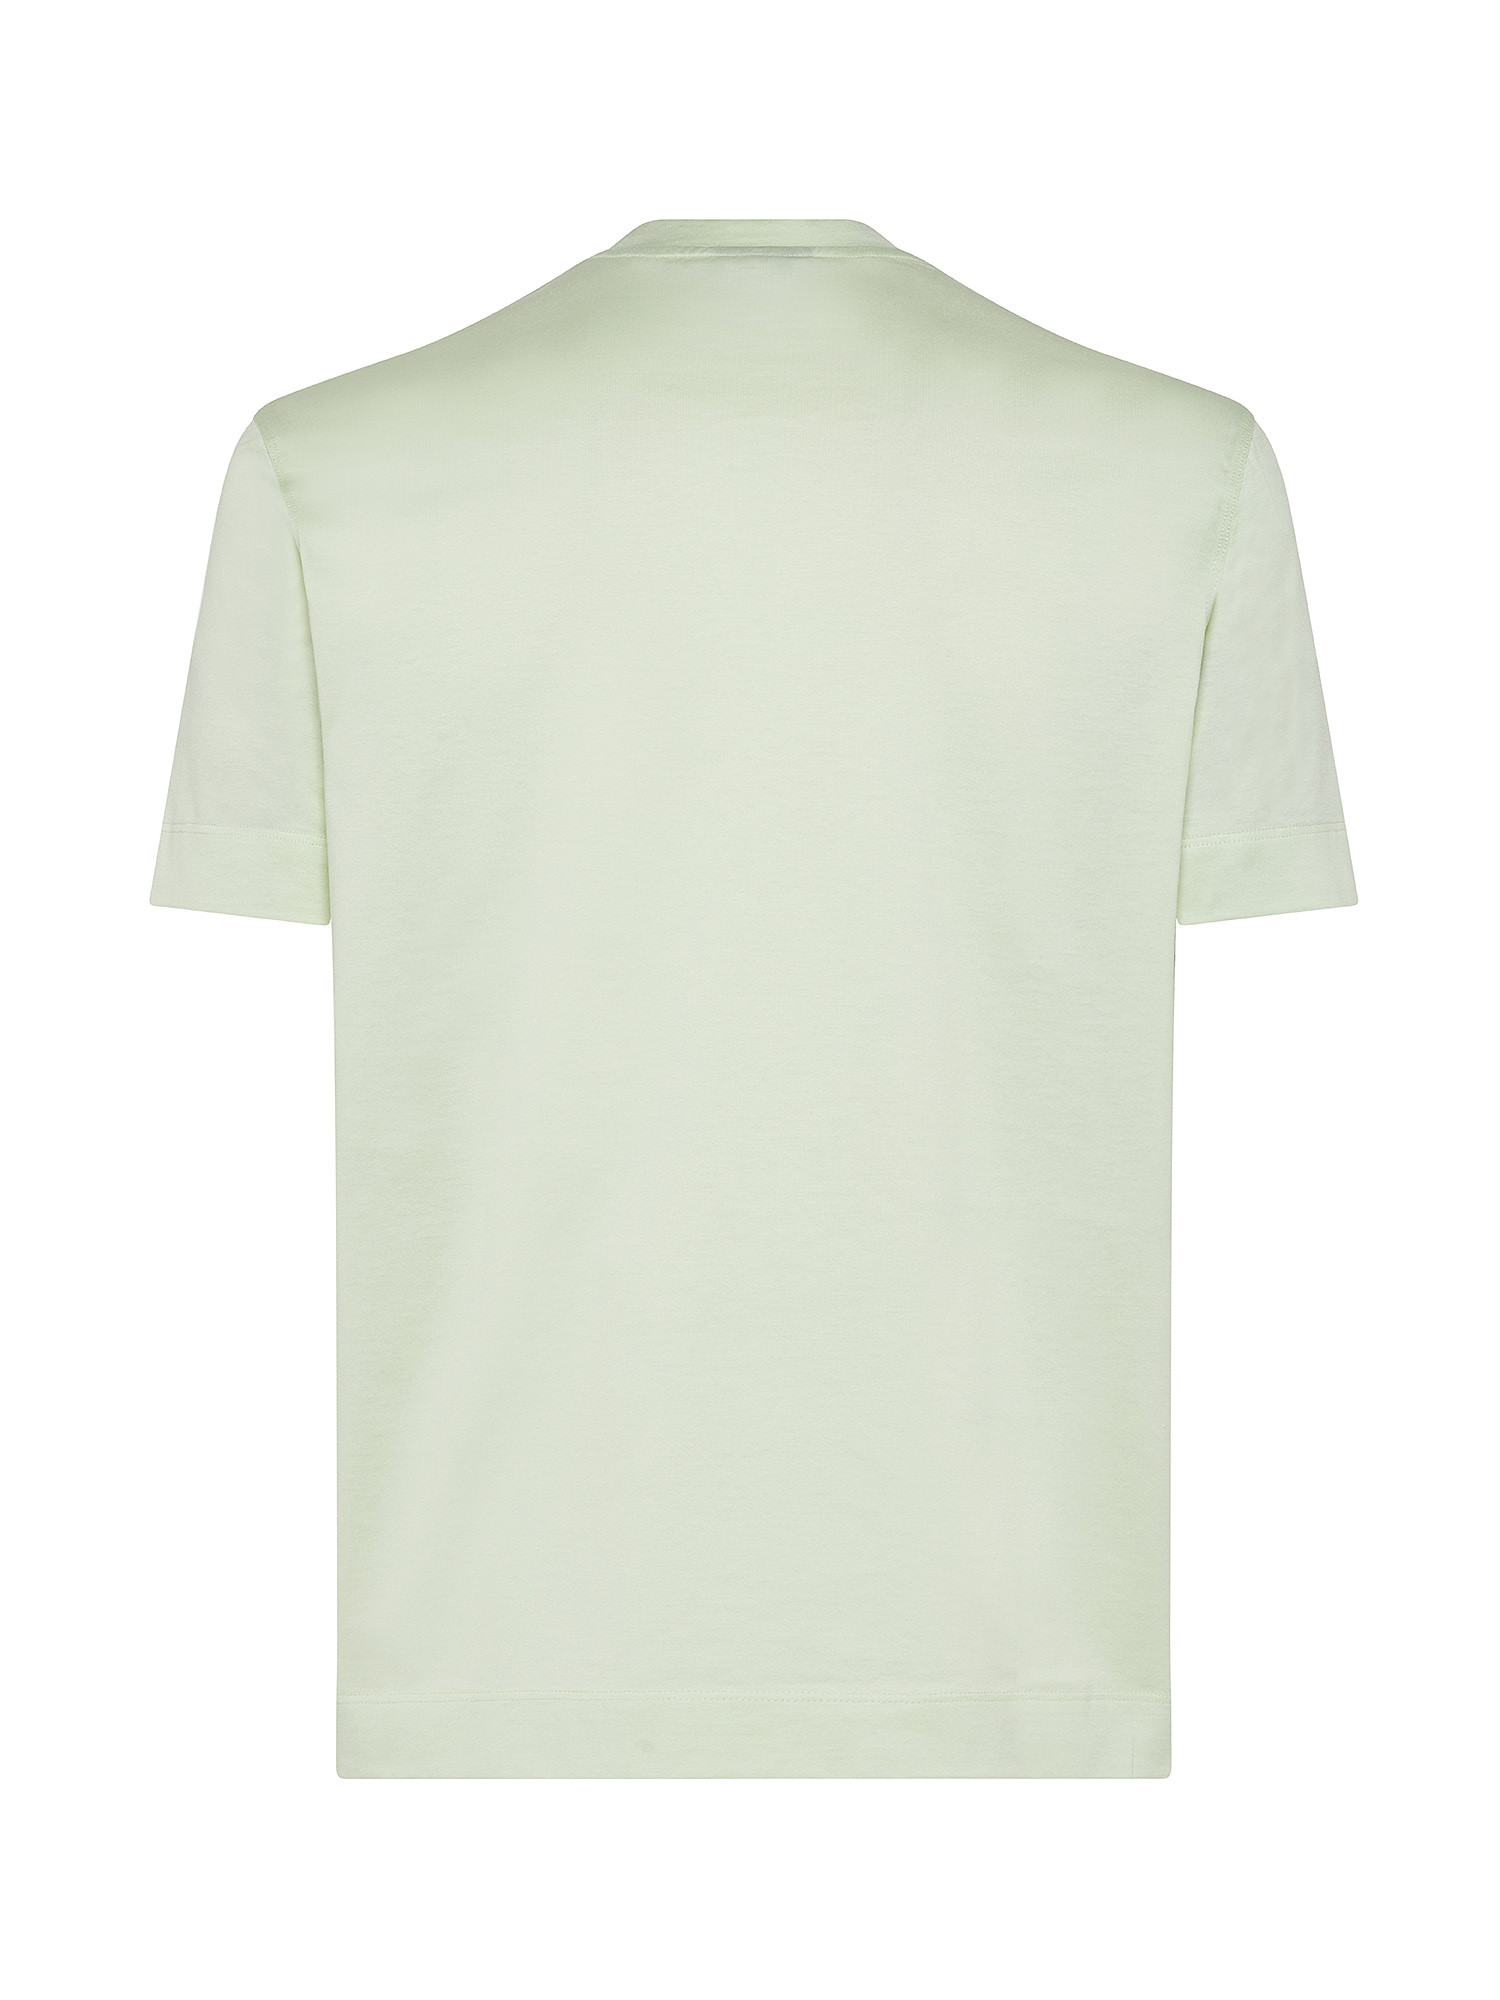 Emporio Armani - T-shirt in cotone con logo, Verde lime, large image number 1